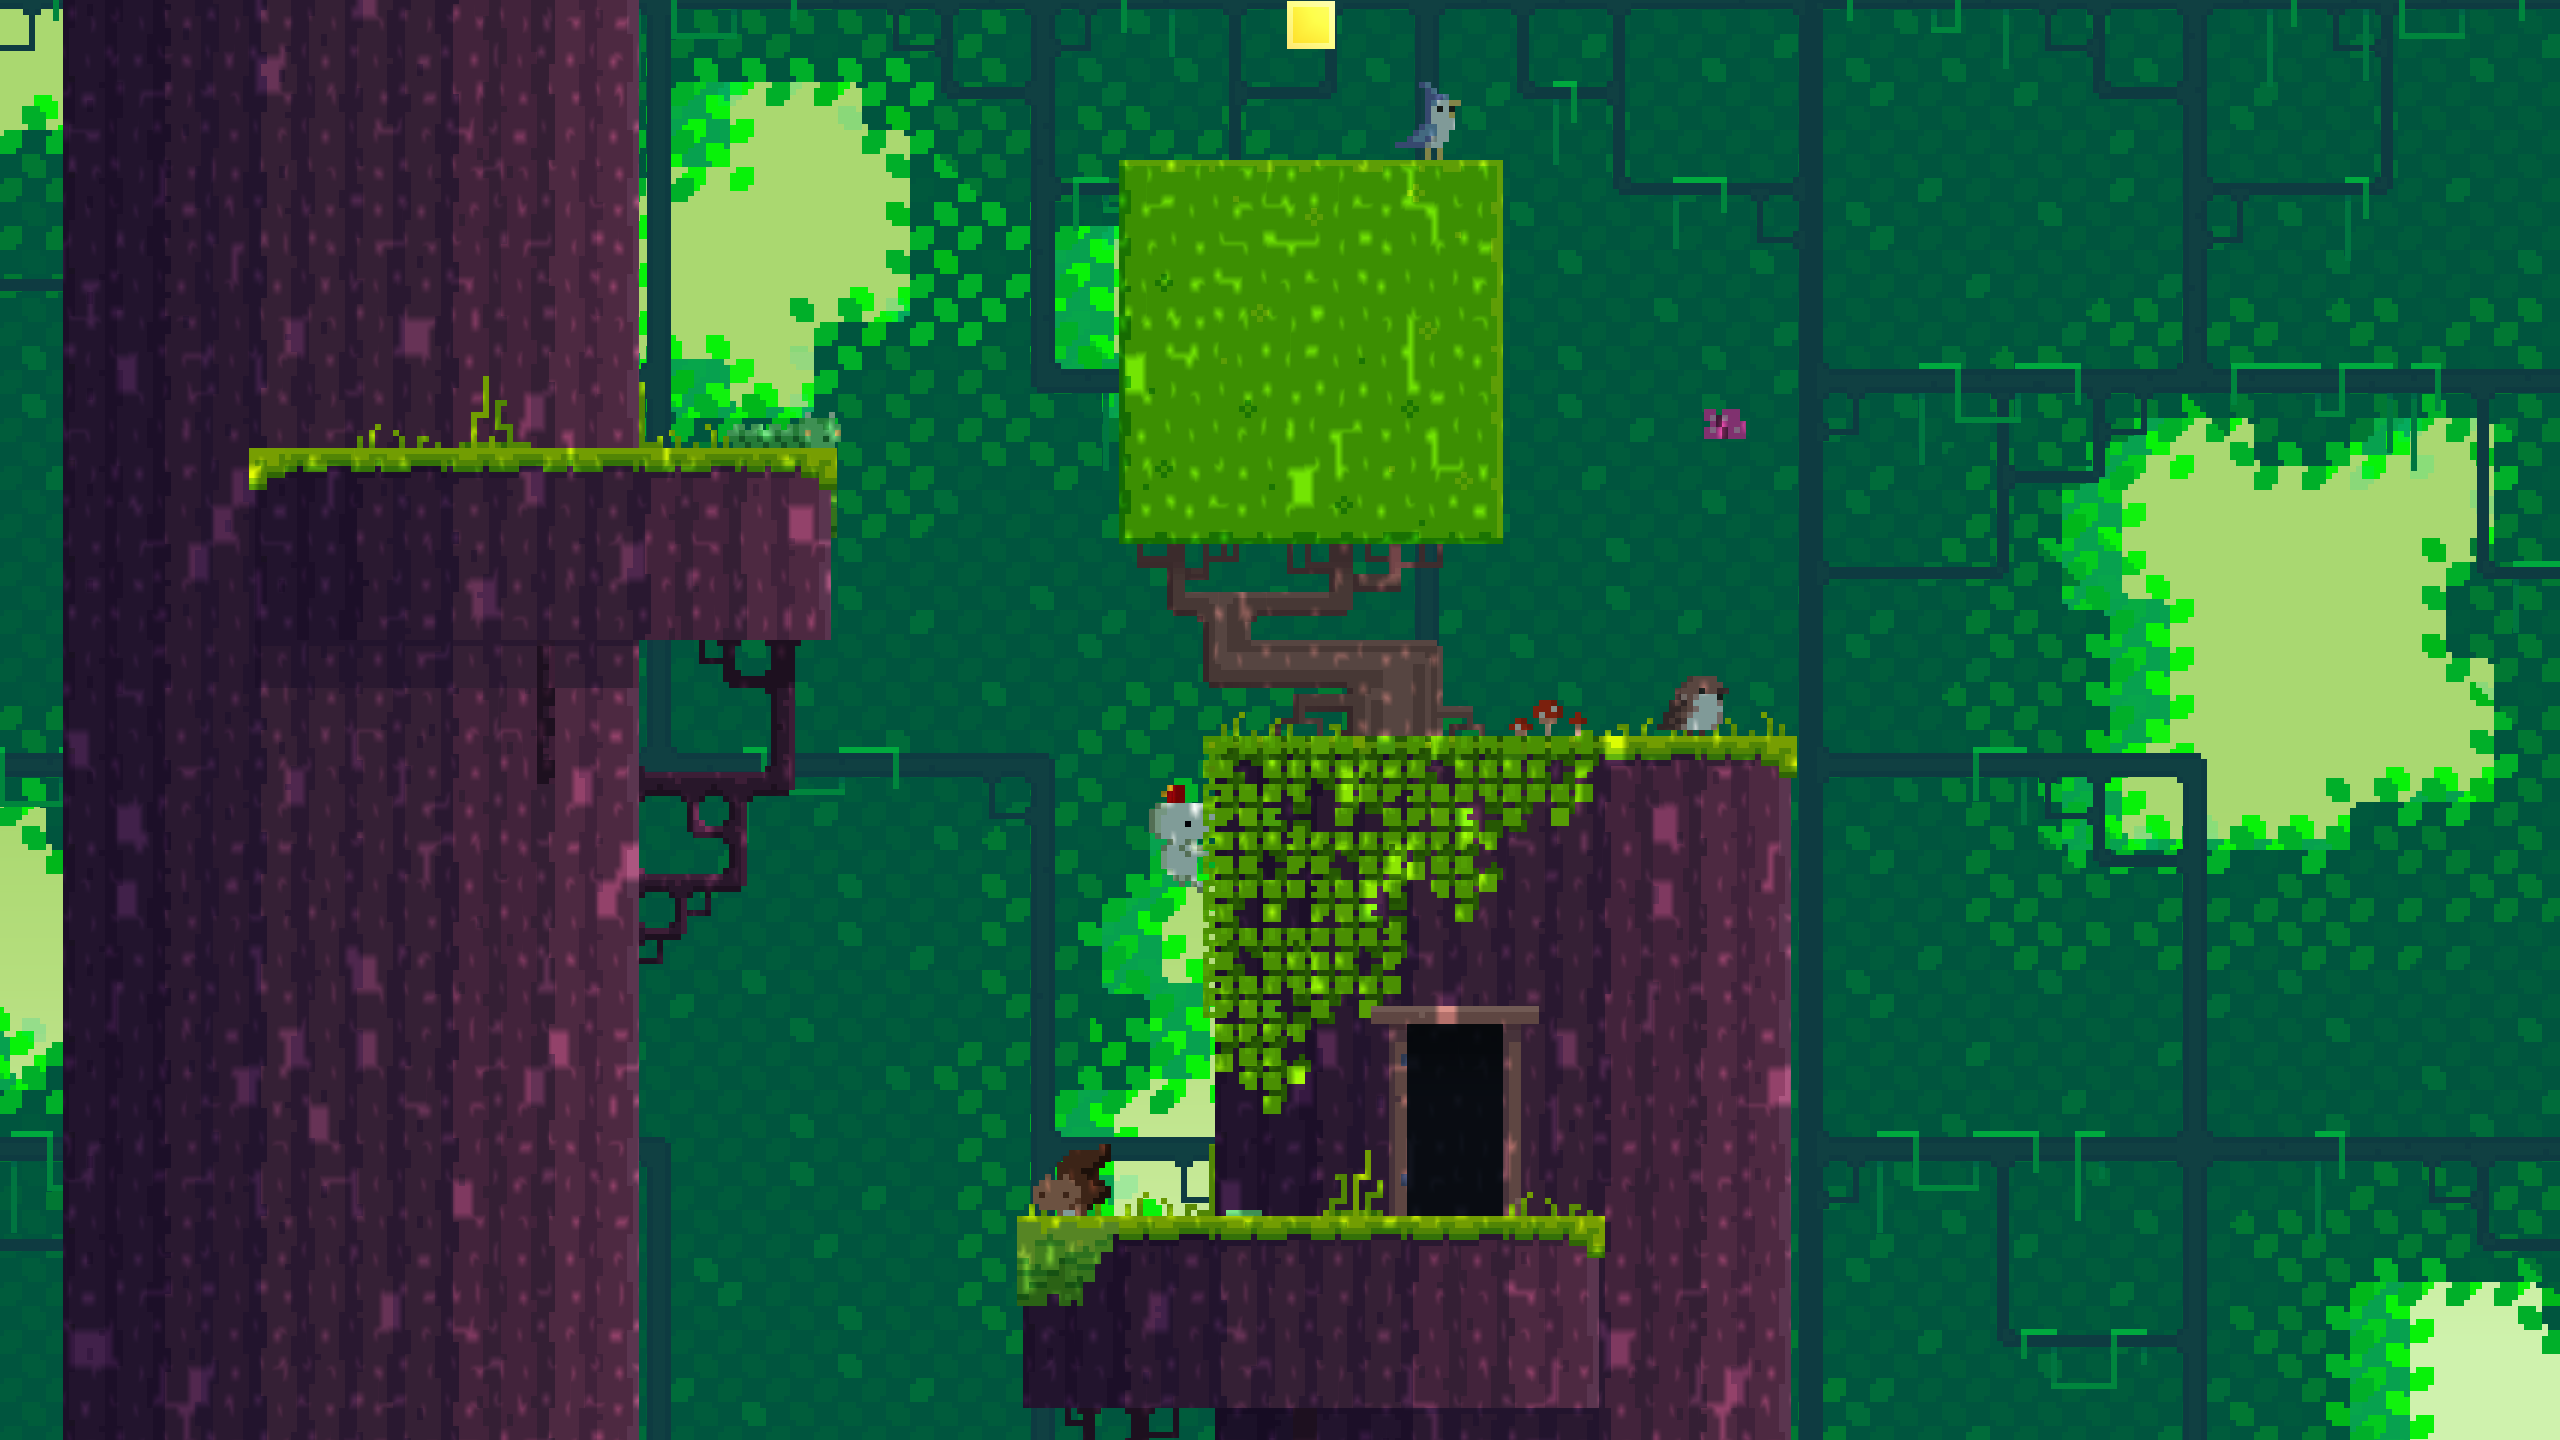 In Fez, the player-character hops between platforms to collect golden cube fragments in a variety of settings.